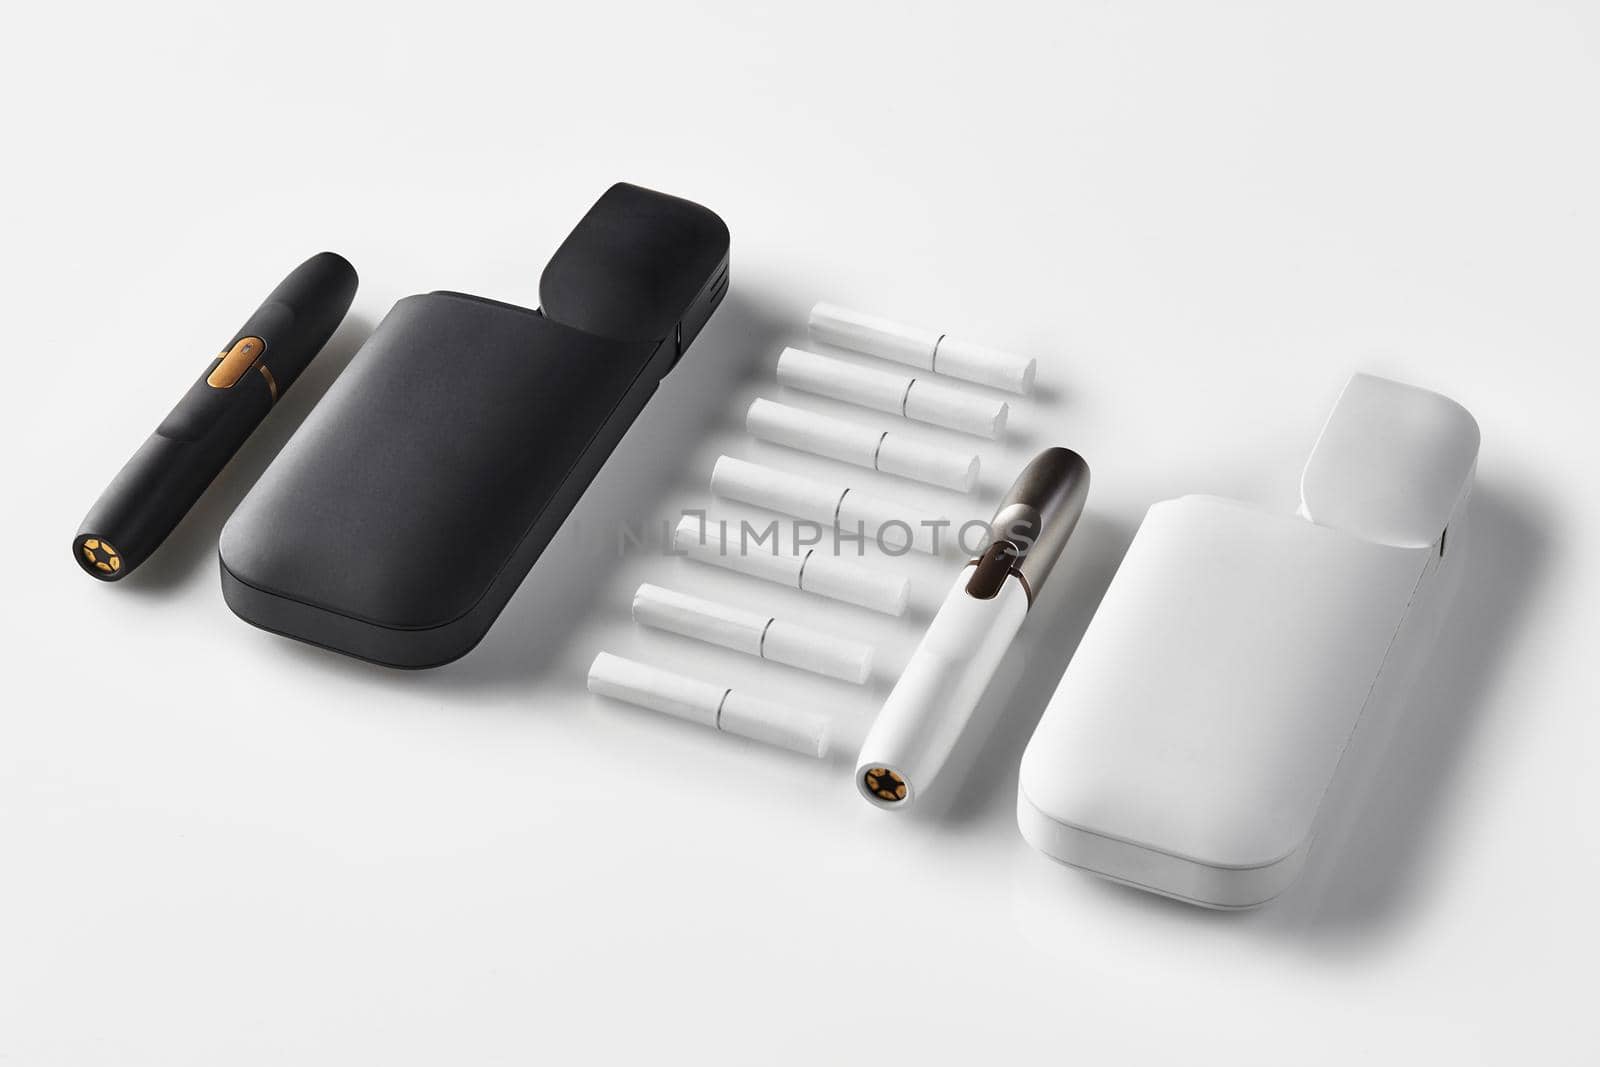 New generation, black and white, two electronic cigarettes and two open batteries, seven heatsticks isolated on white. Heating tobacco system. Tools used to help stop smoking. Close up, copy space